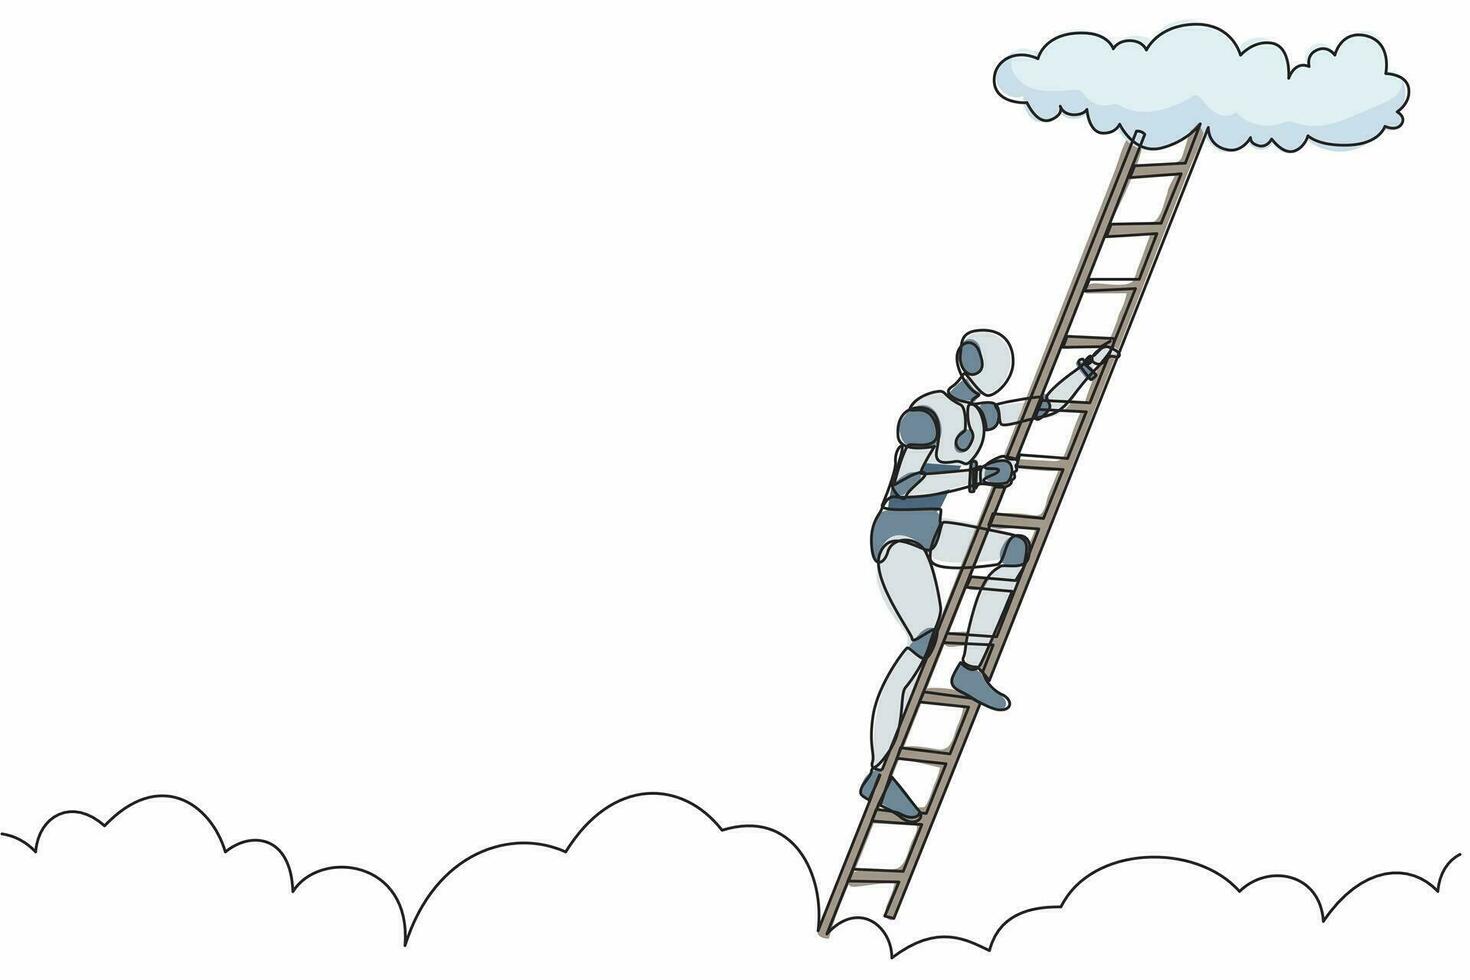 Single one line drawing robot climbing up career ladder to cloud. Future technology development. Artificial intelligence and machine learning. Continuous line draw design graphic vector illustration